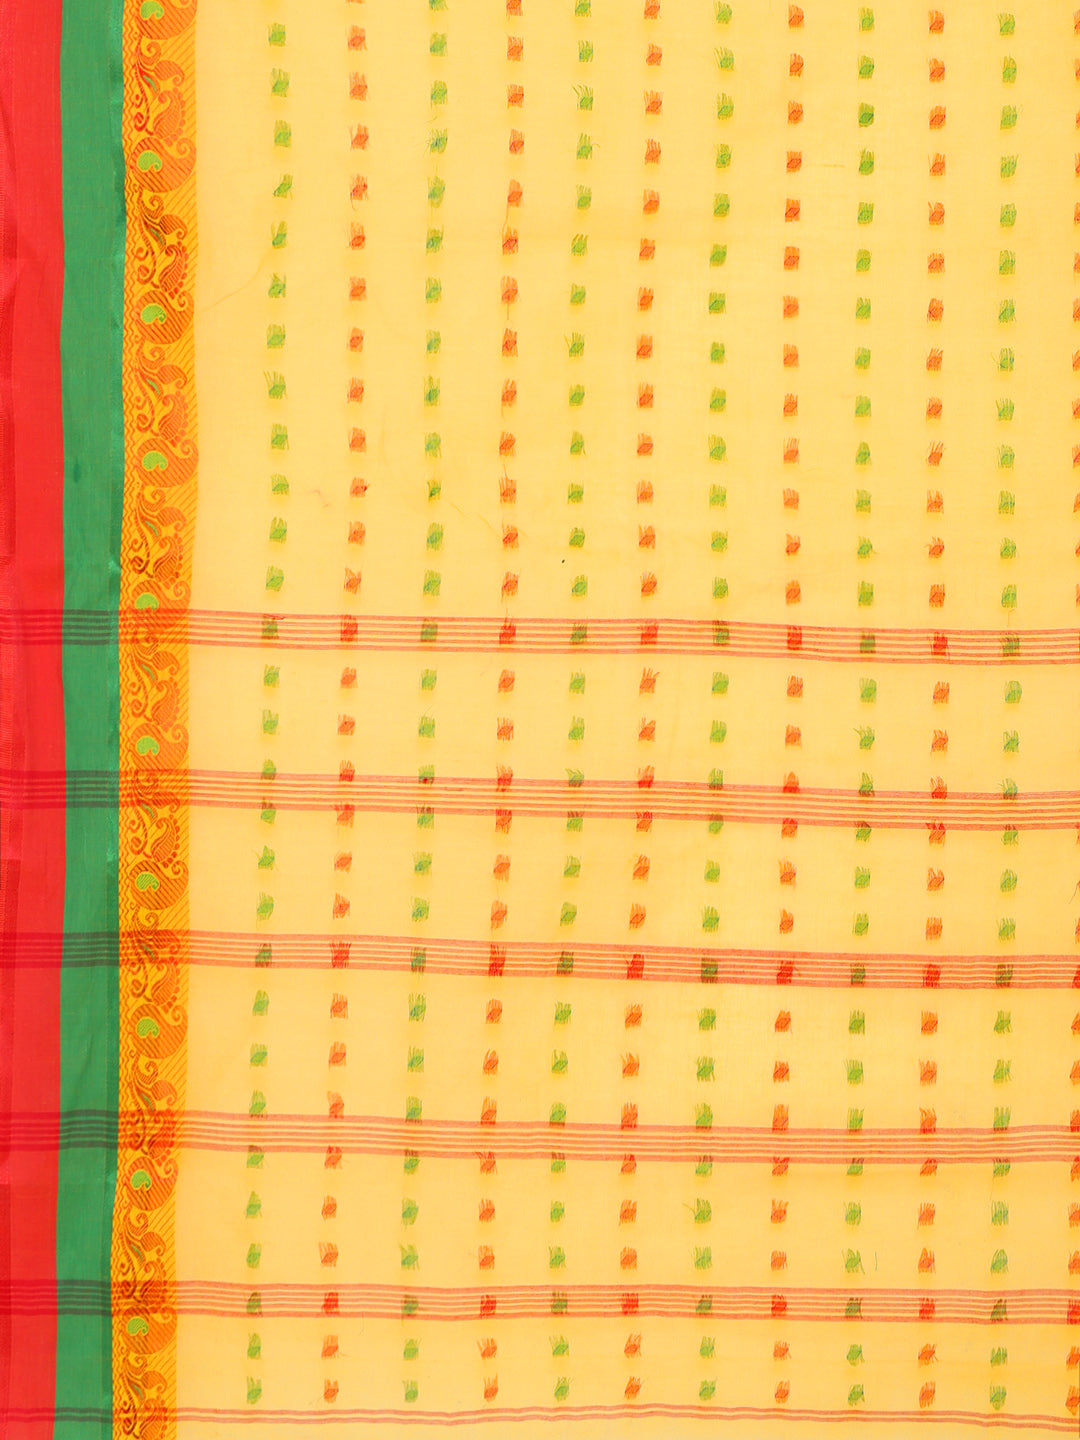 Yellow Tant Woven Design Saree Without Blouse Piece DUTASA024 DUTASA024-Saree-Kalakari India-DUTASA024-Geographical Indication, Hand Crafted, Heritage Prints, Natural Dyes, Sarees, Silk Cotton, Sustainable Fabrics, Taant, Tant, West Bengal, Woven-[Linen,Ethnic,wear,Fashionista,Handloom,Handicraft,Indigo,blockprint,block,print,Cotton,Chanderi,Blue, latest,classy,party,bollywood,trendy,summer,style,traditional,formal,elegant,unique,style,hand,block,print, dabu,booti,gift,present,glamorous,affordab